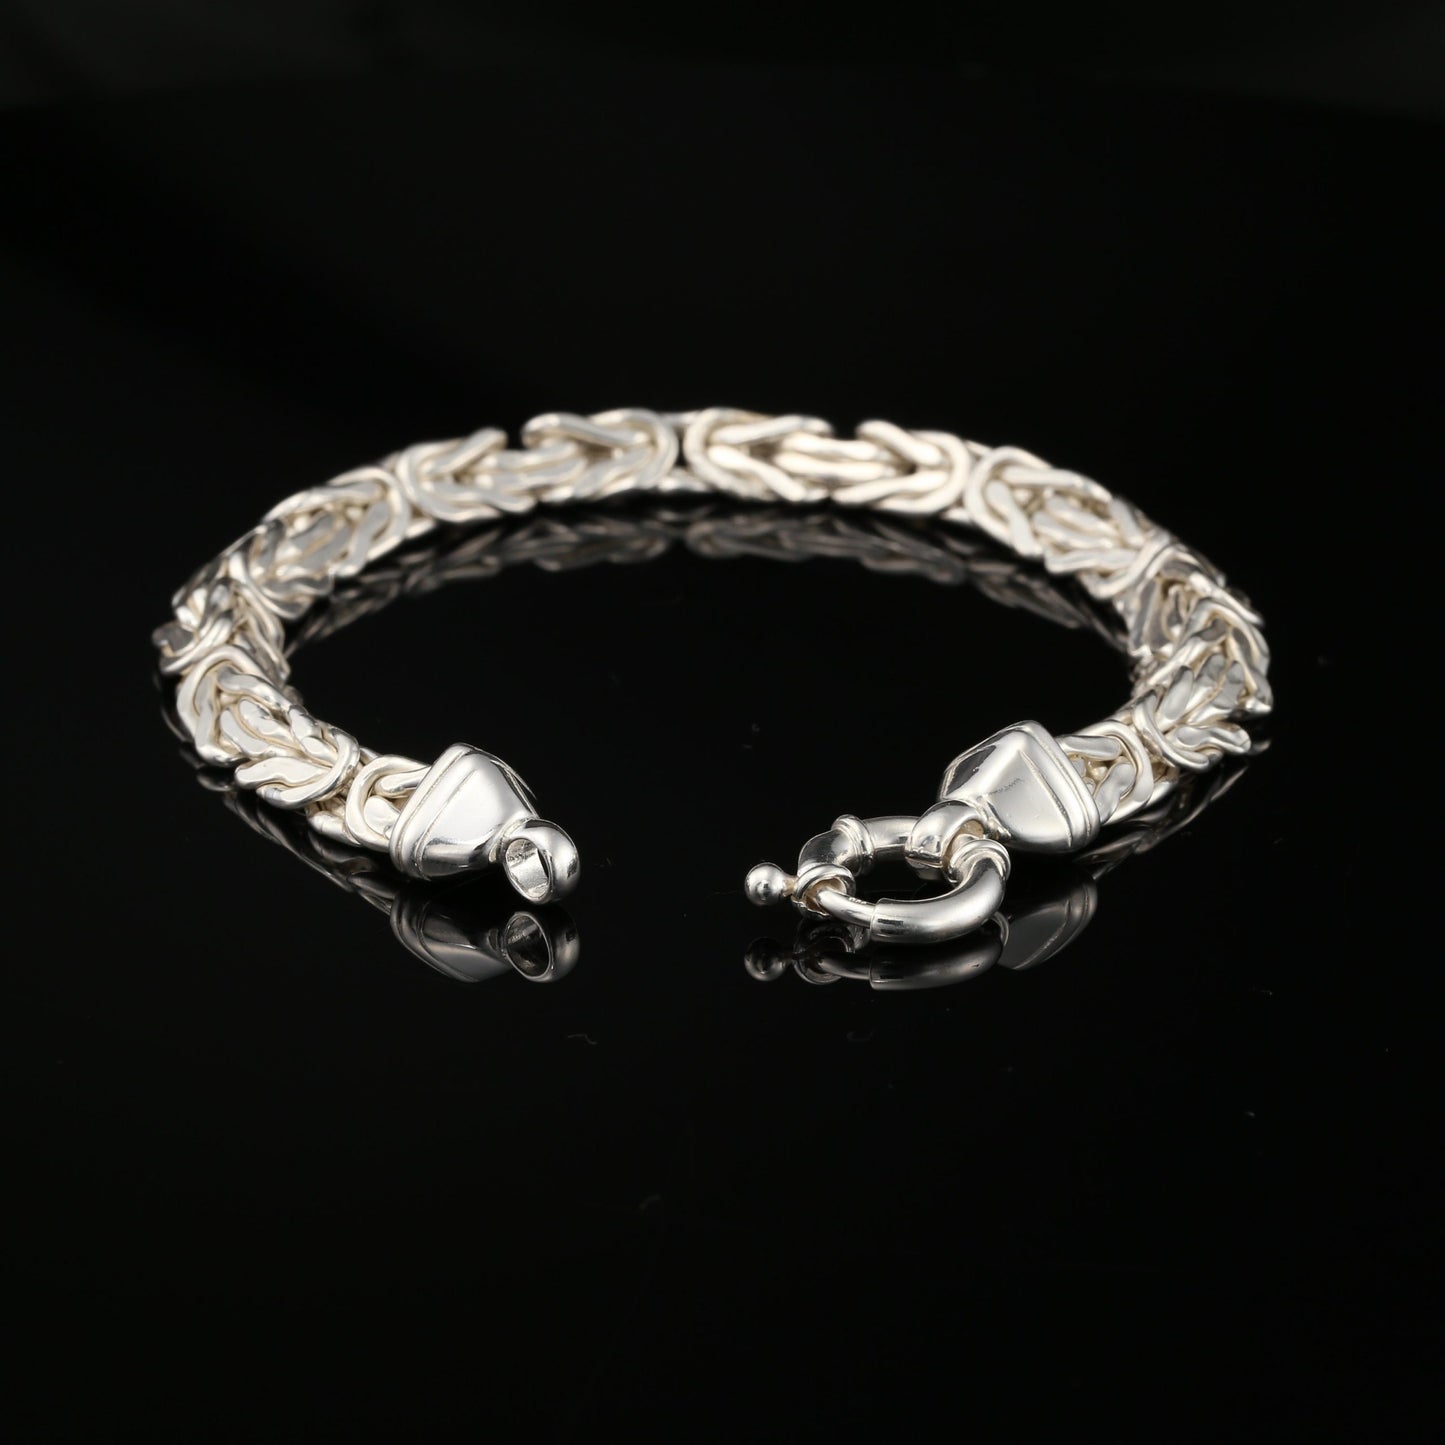 Thin Byzantine Chain Bracelet, Chainmail Jewelry in Sterling Silver, 8.75 inch, Unisex